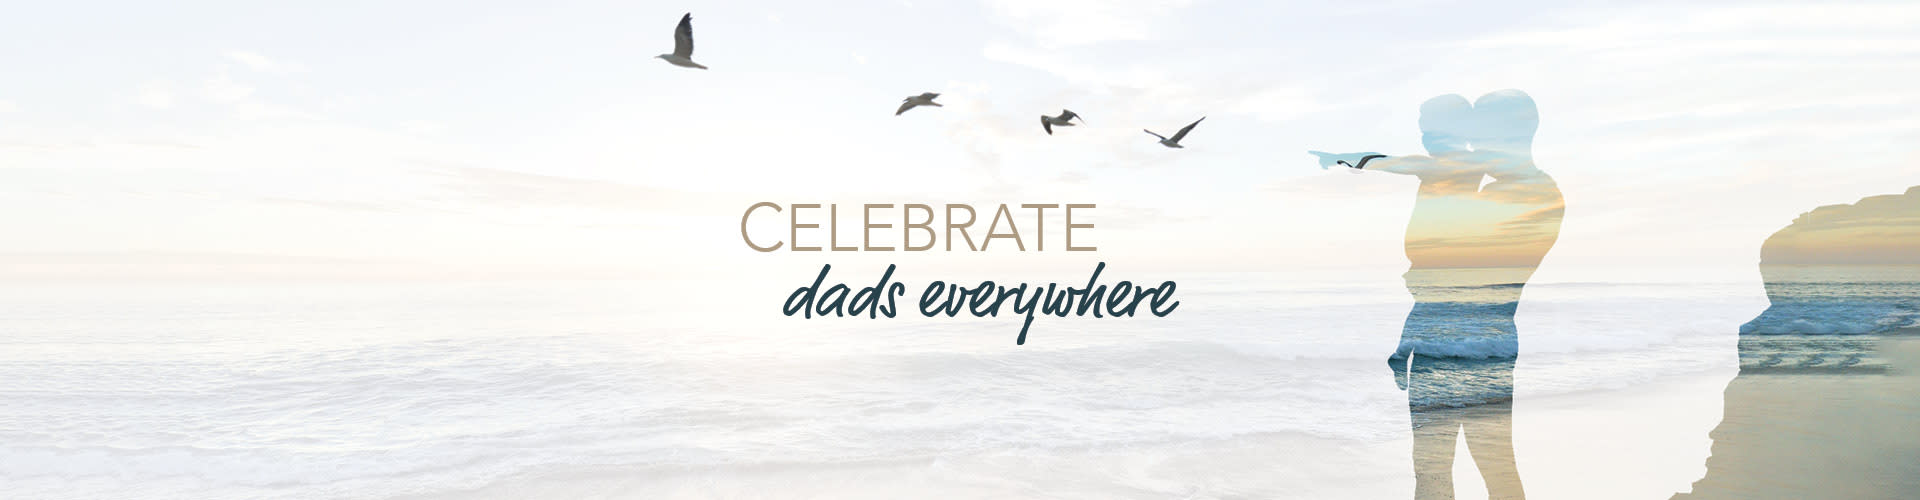 This Father's Day, Celebrate dads everywhere with Oaks Hotels, Resorts and Suites